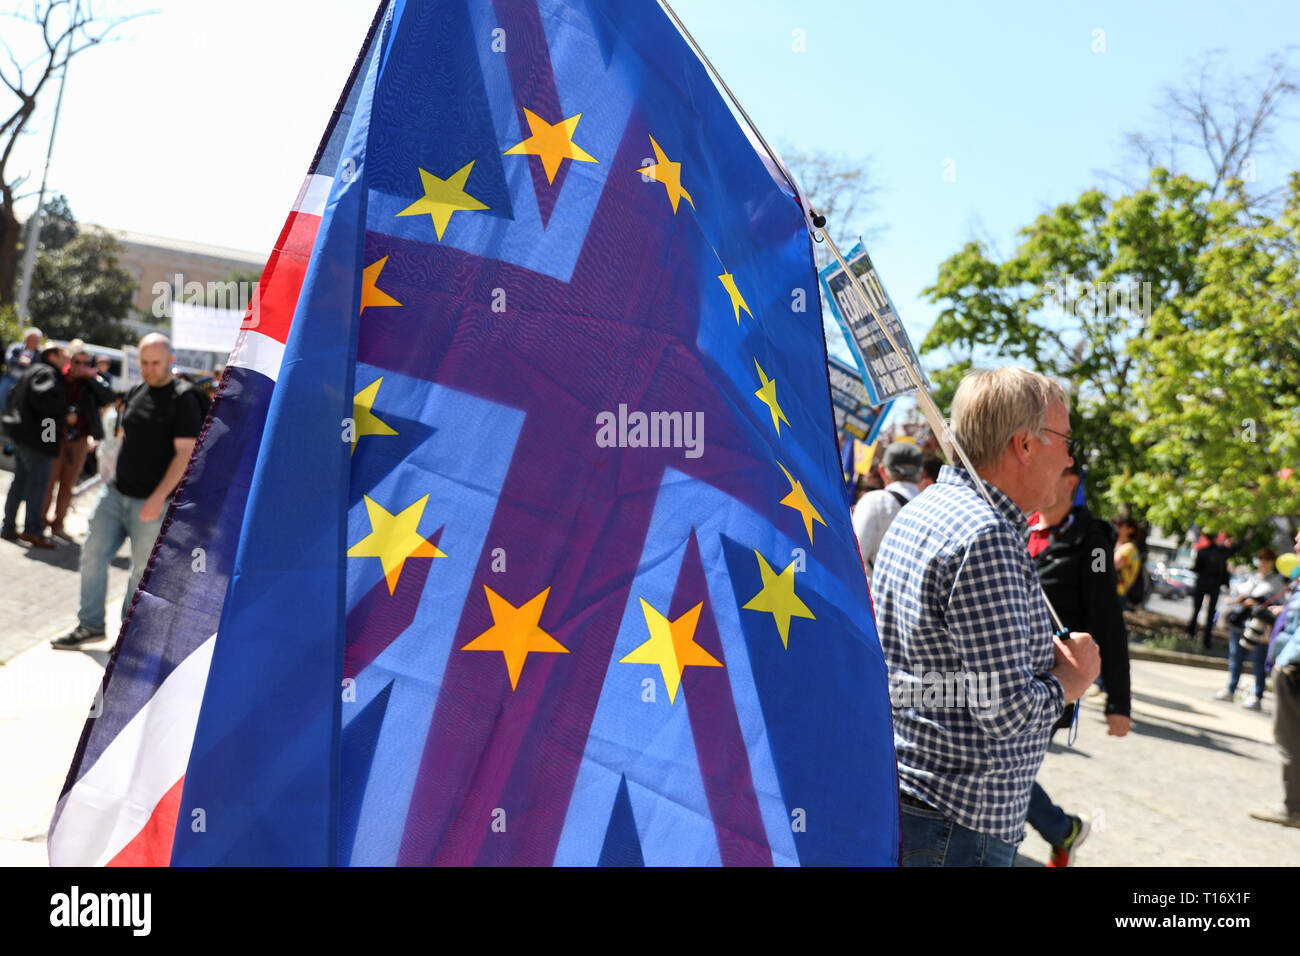 A participant seen with flags of England and Europe during the demonstration. The British community in Spain demonstrated in favor of another referendum on Brexit at Plaza de Colón "in defense of the rights of the five million Europeans in the United Kingdom and British in the European Union and to request a second referendum on the exit of Great Britain from the EU ". Stock Photo